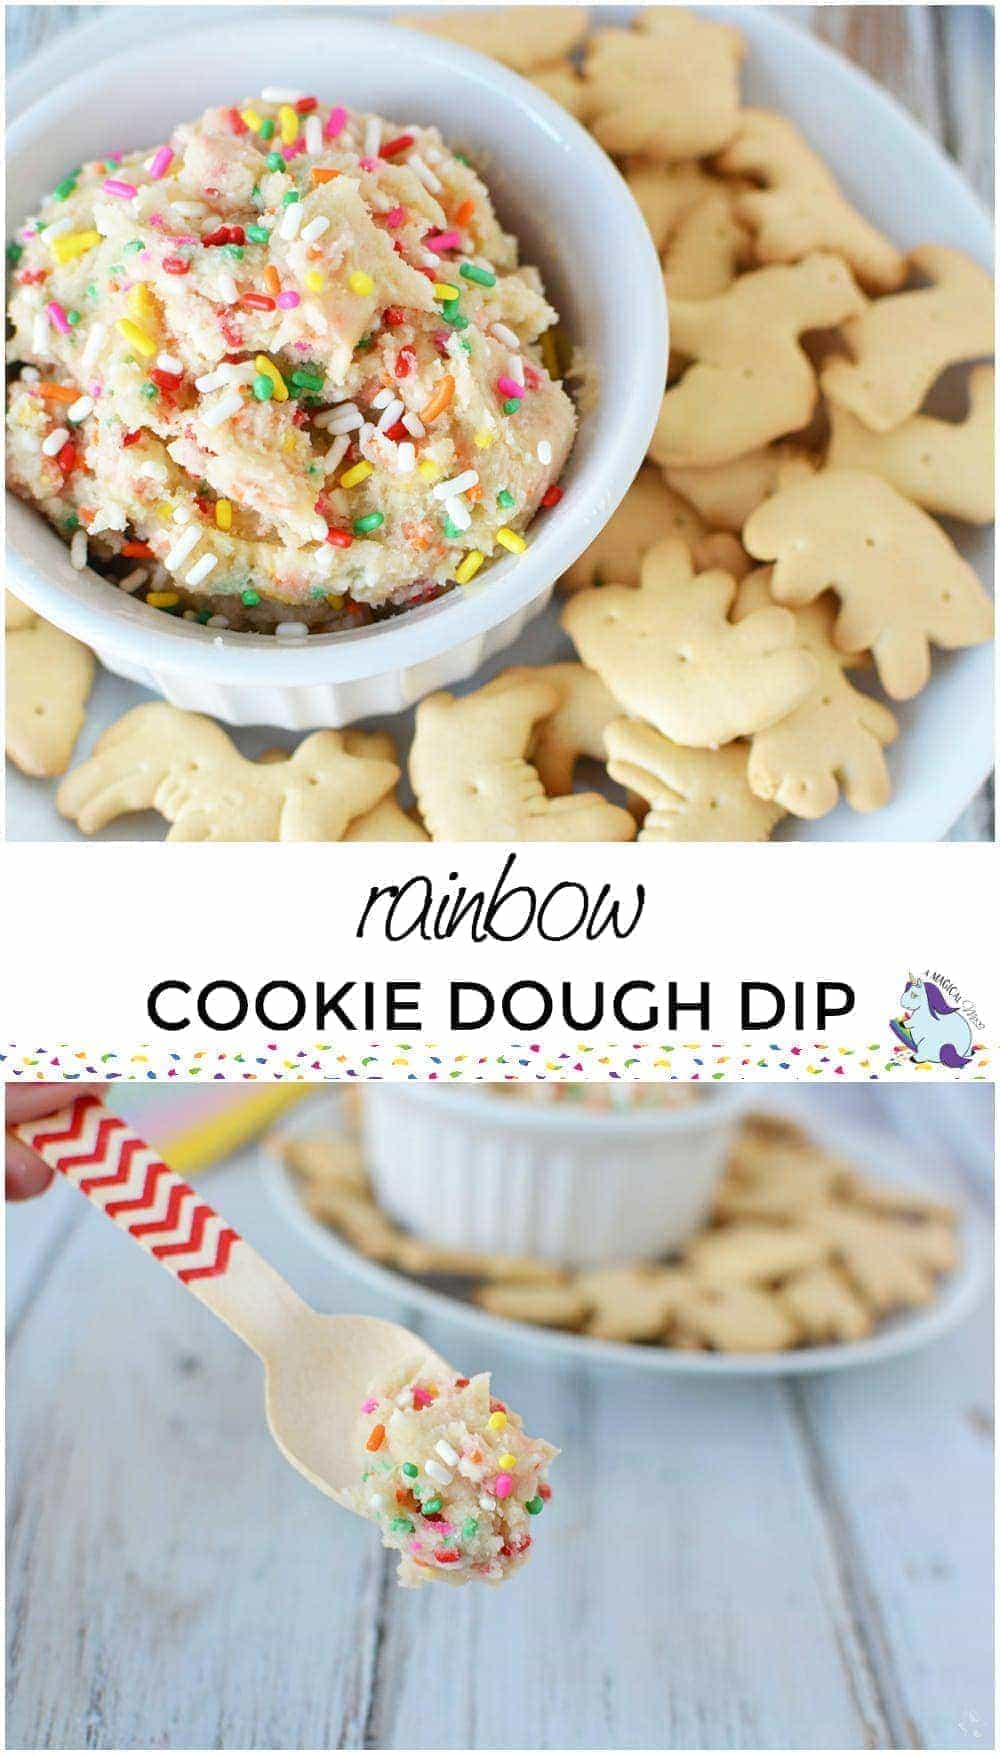 Rainbow cookie dough dip is most definitely a recipe you should have at your fingertips. It's safe-to-eat cookie dough. What more do you need to know? If I am totally honest, I love cookie dough more than baked cookies. So, bring on the cookie dough goodies!